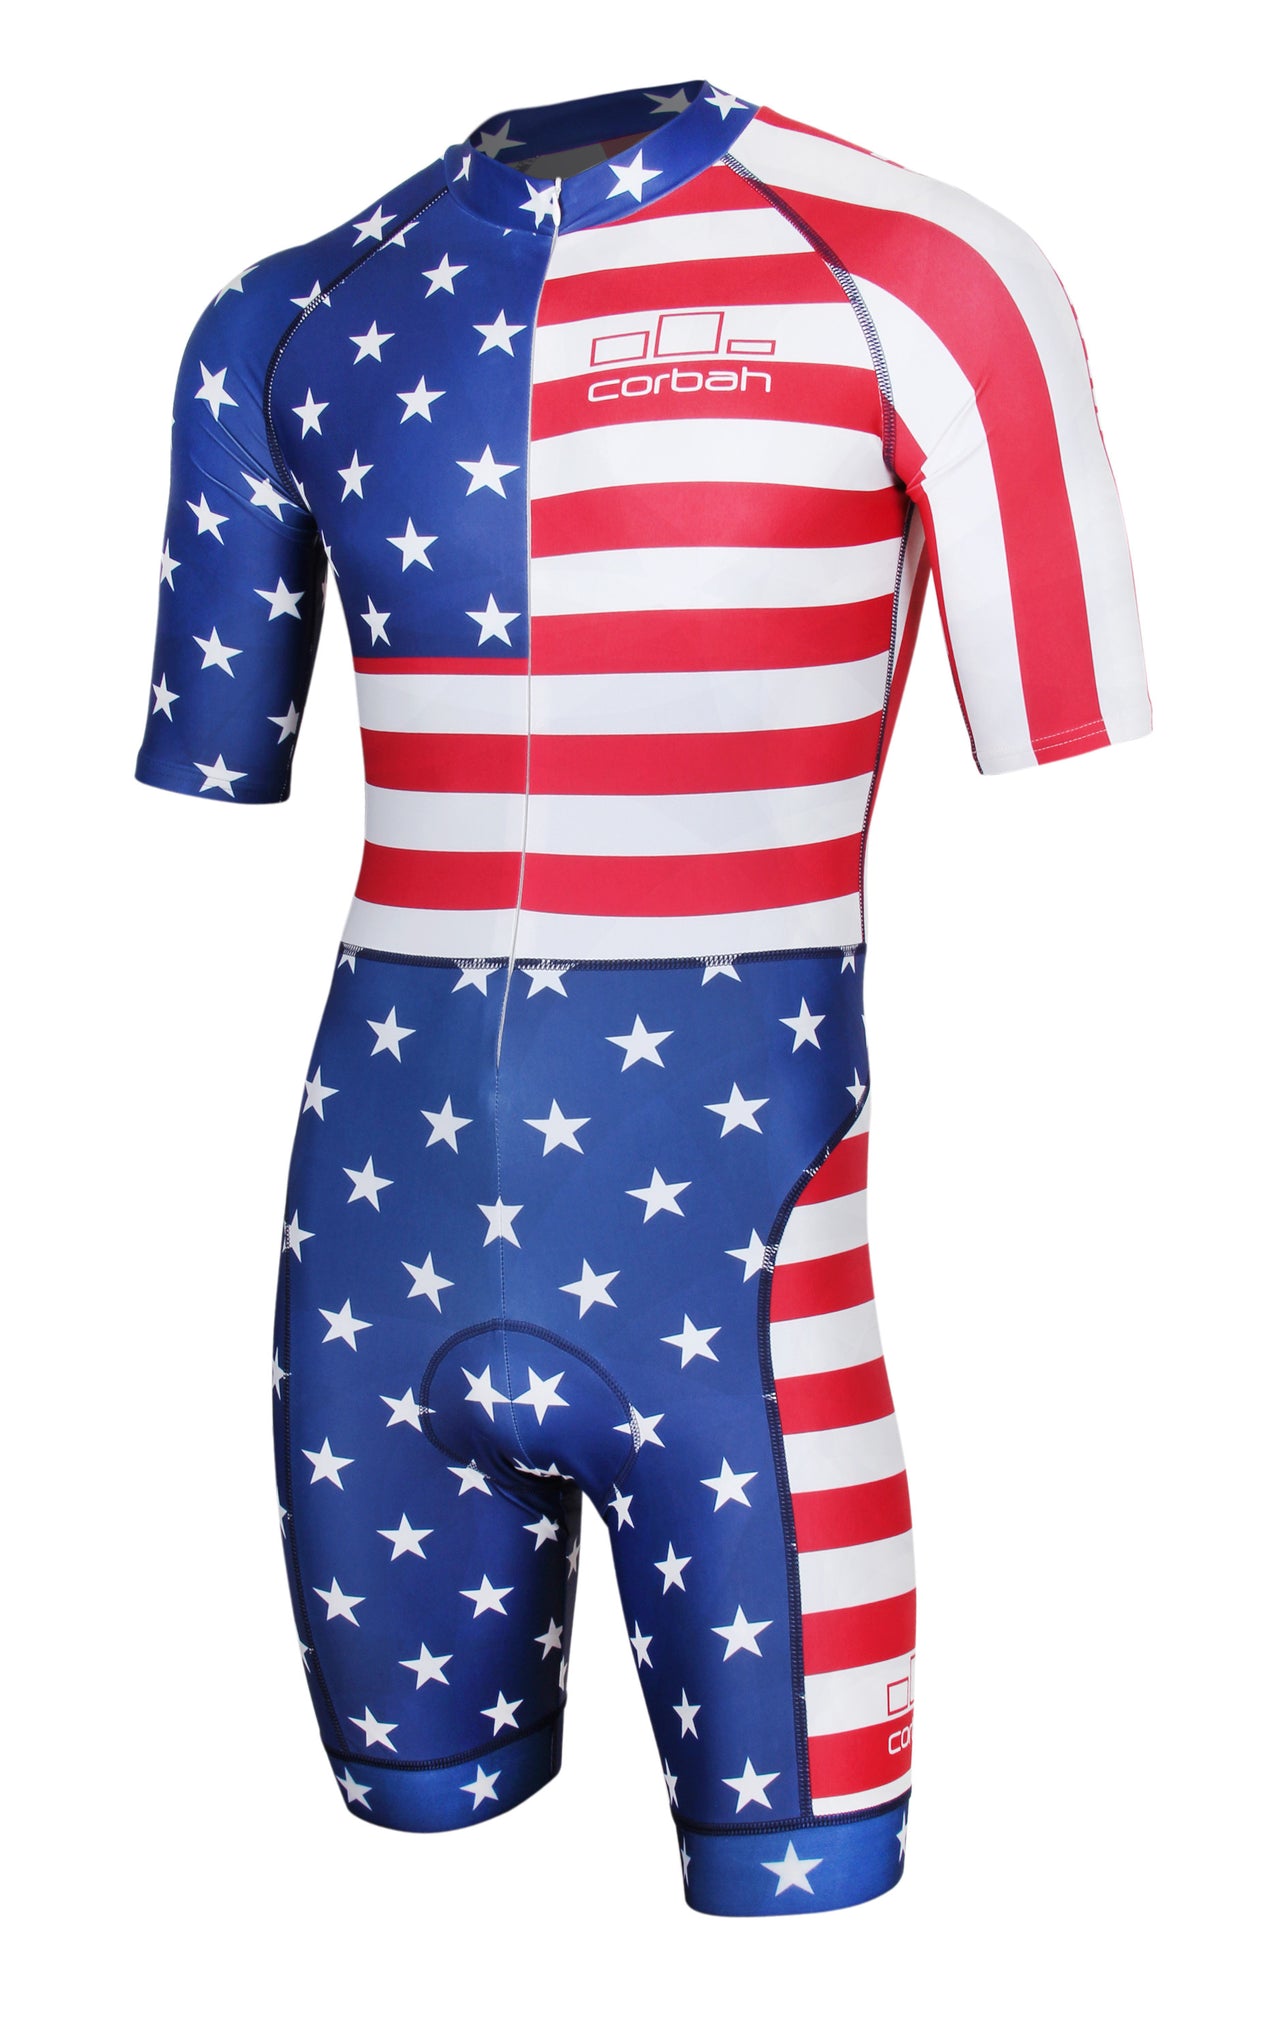 The Patriot Cycling Skinsuit by Corbah corbah